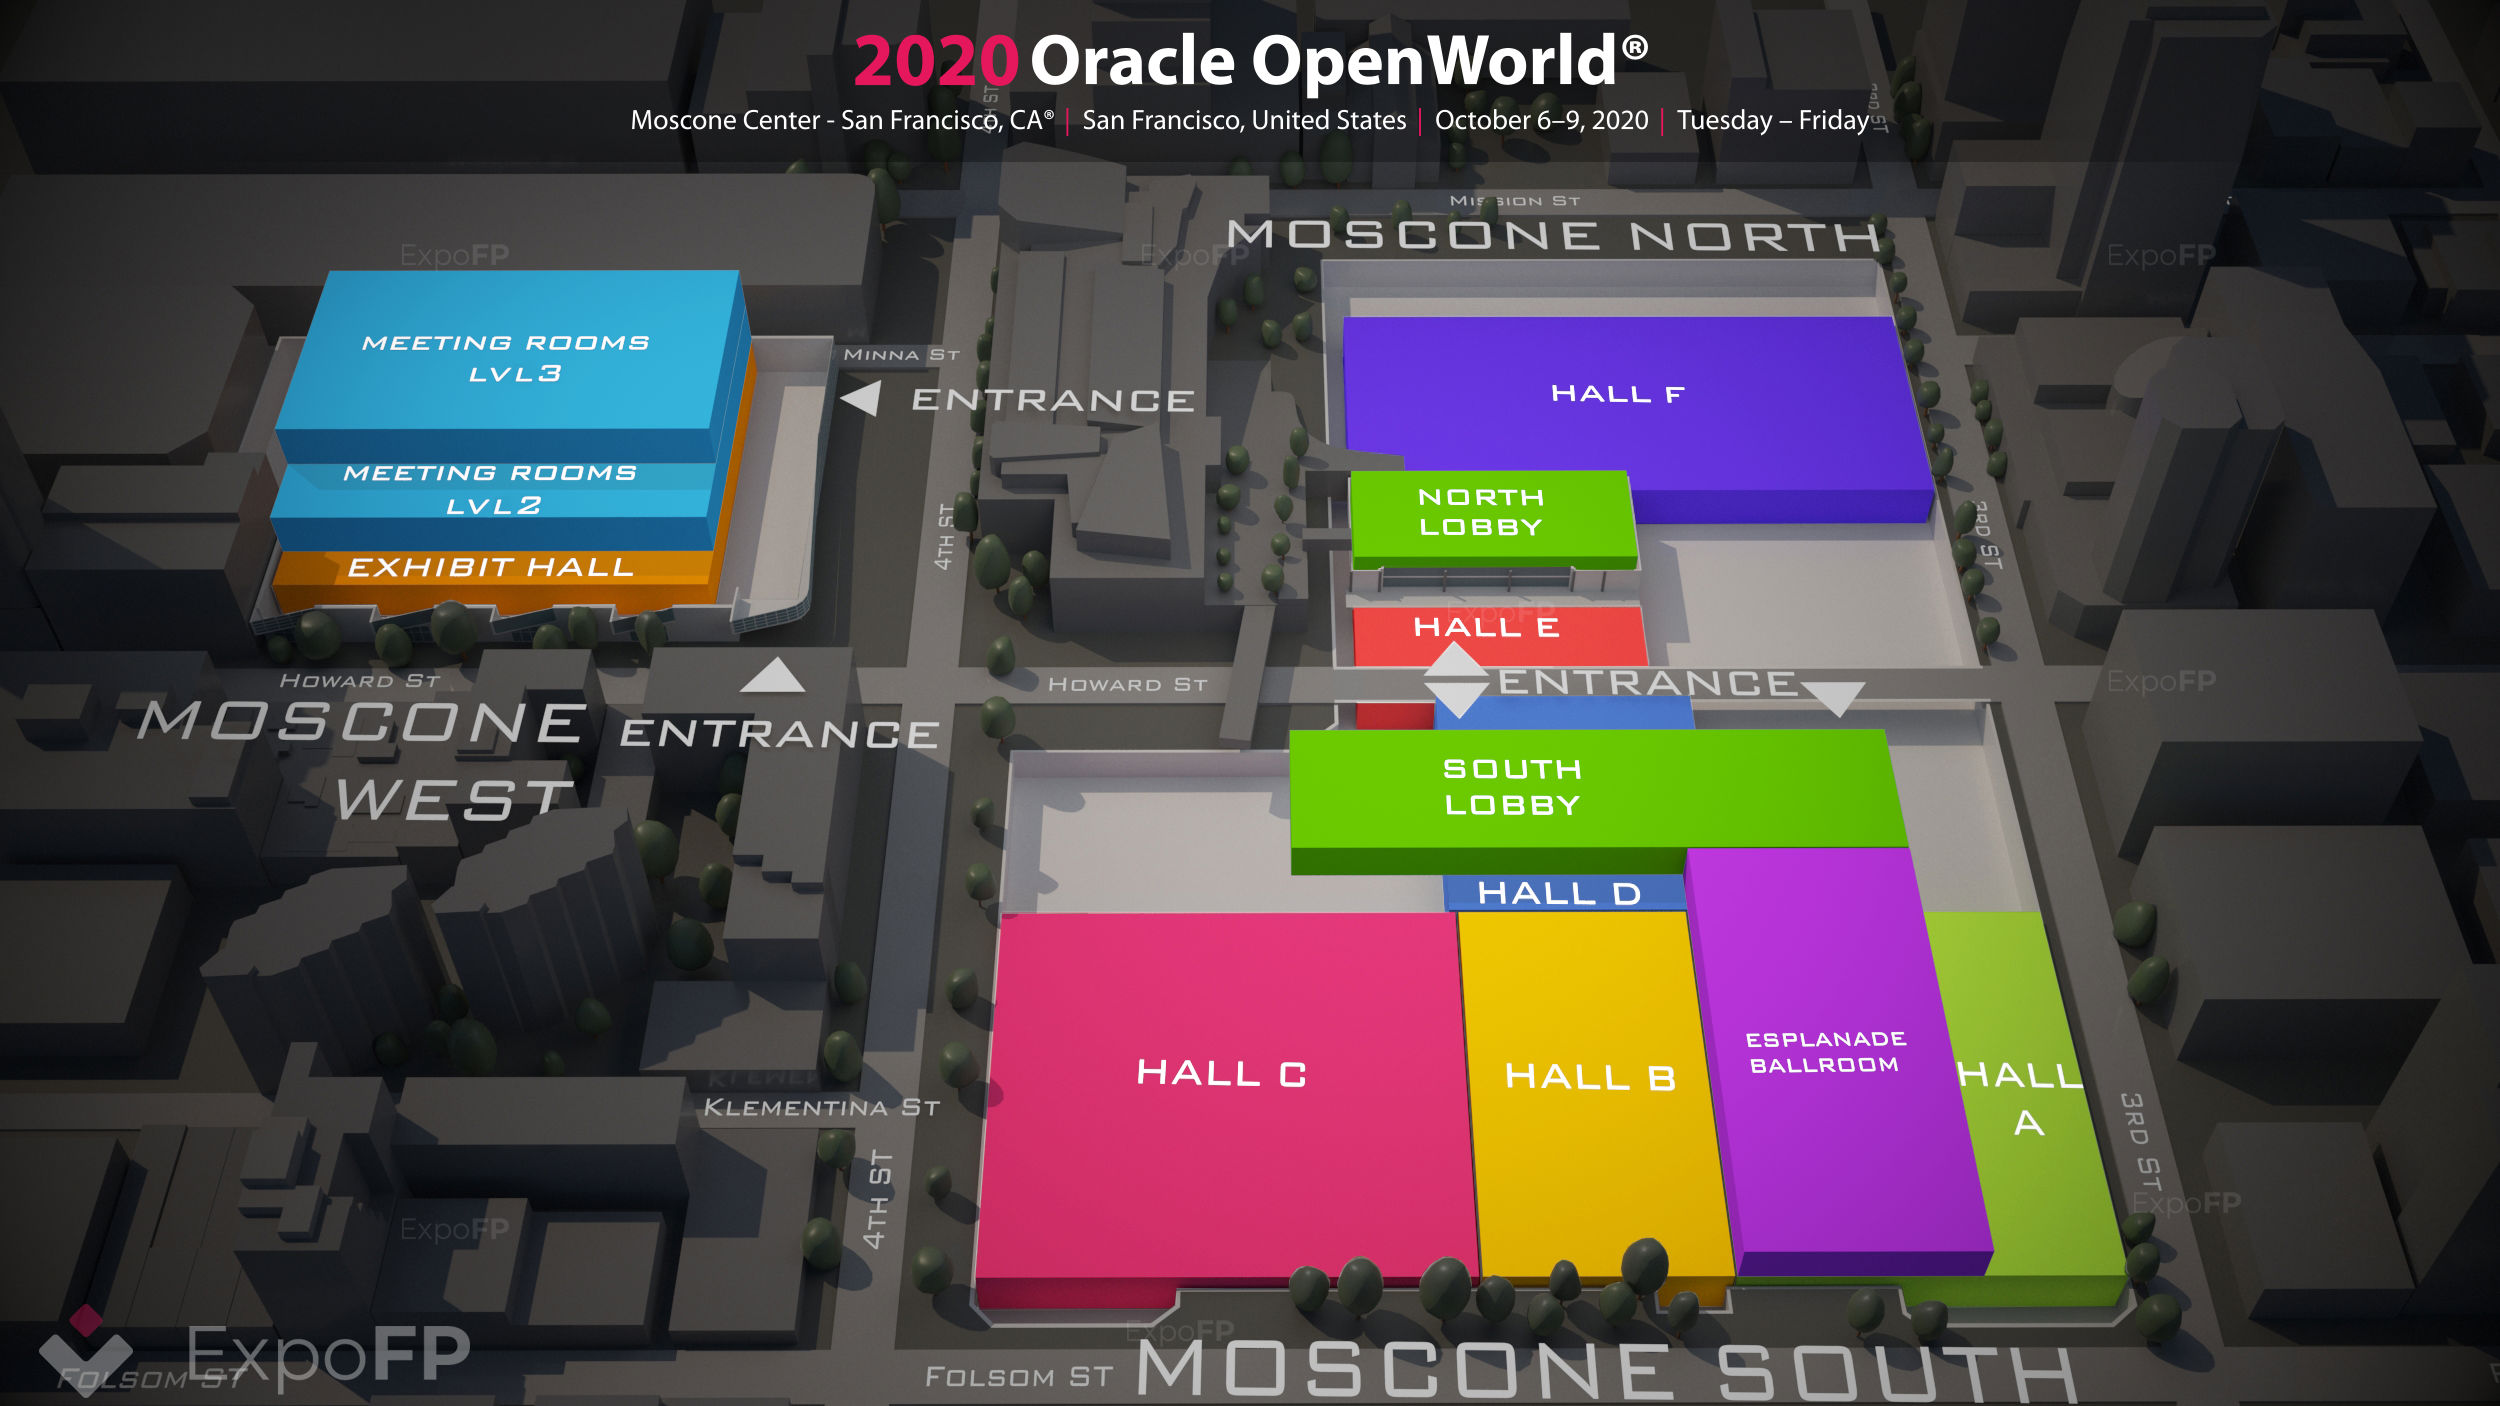 Oracle OpenWorld 2020 in Moscone Center San Francisco, CA